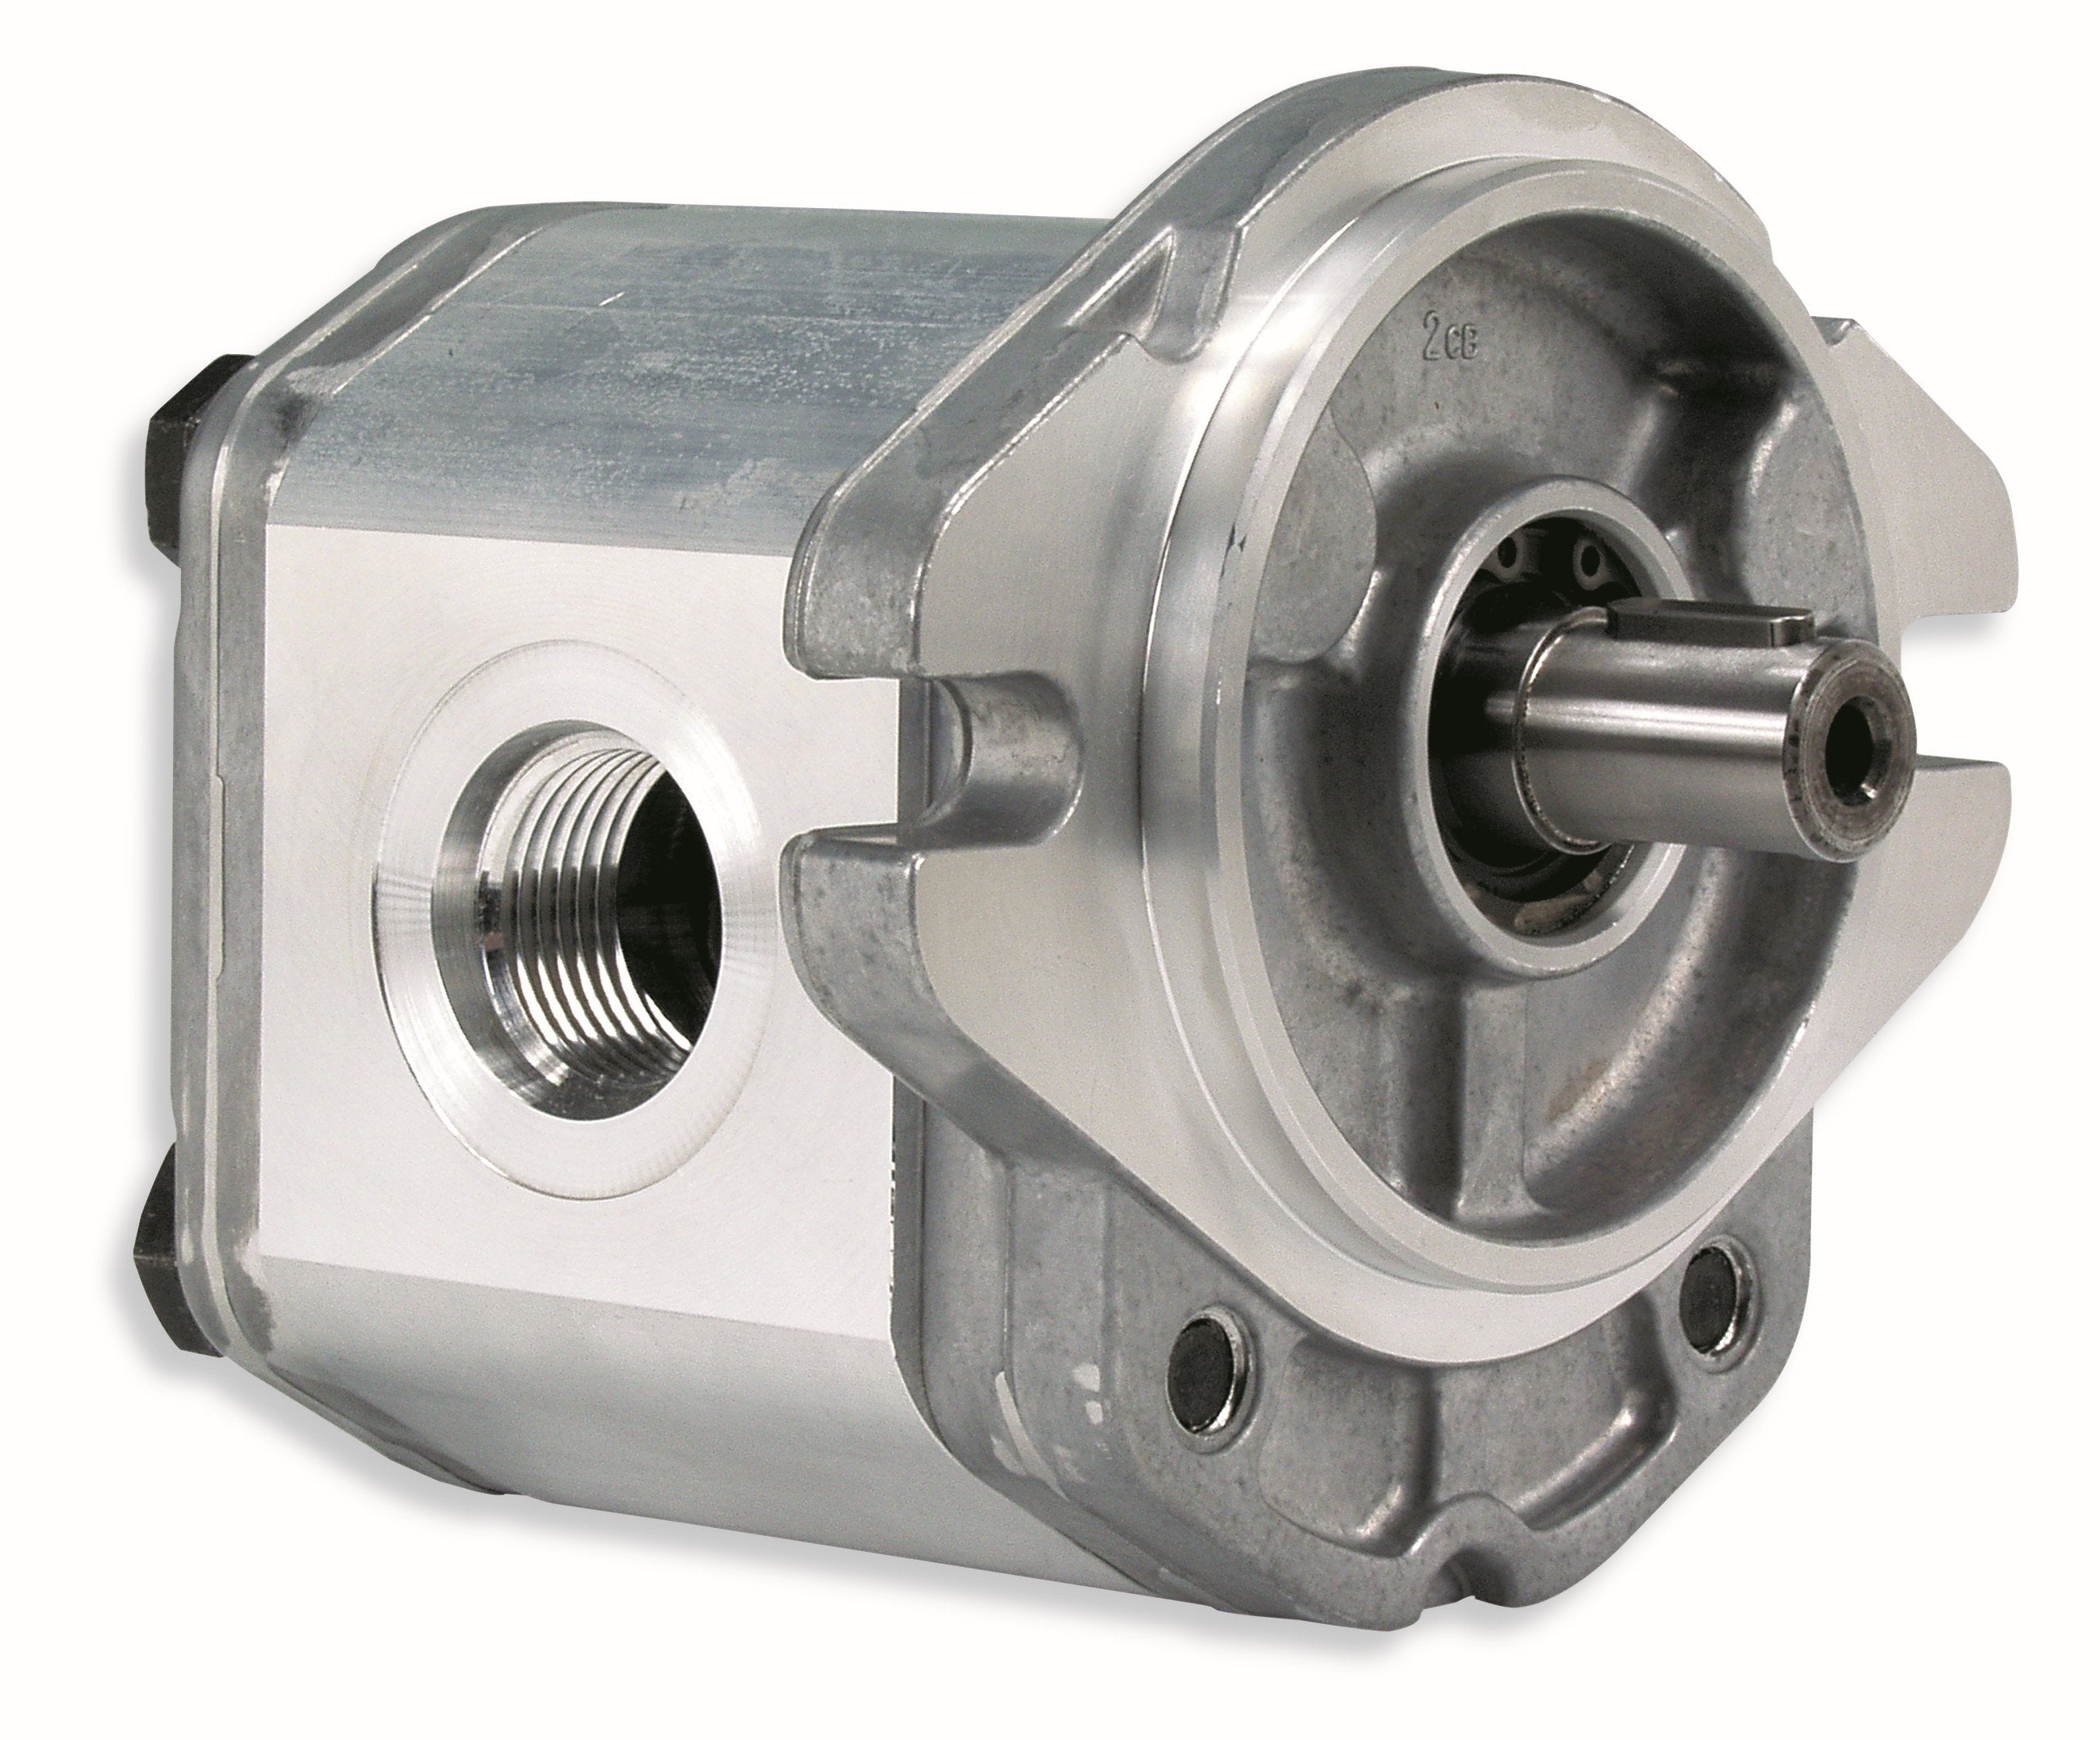 GHM3A-R-80-S1-E4 : Marzocchi Gear Motor, Bidirectional, 52cc, 3335psi rated, 2500RPM, 1" Code 61 ports, 13T 16/32DP Splined Shaft